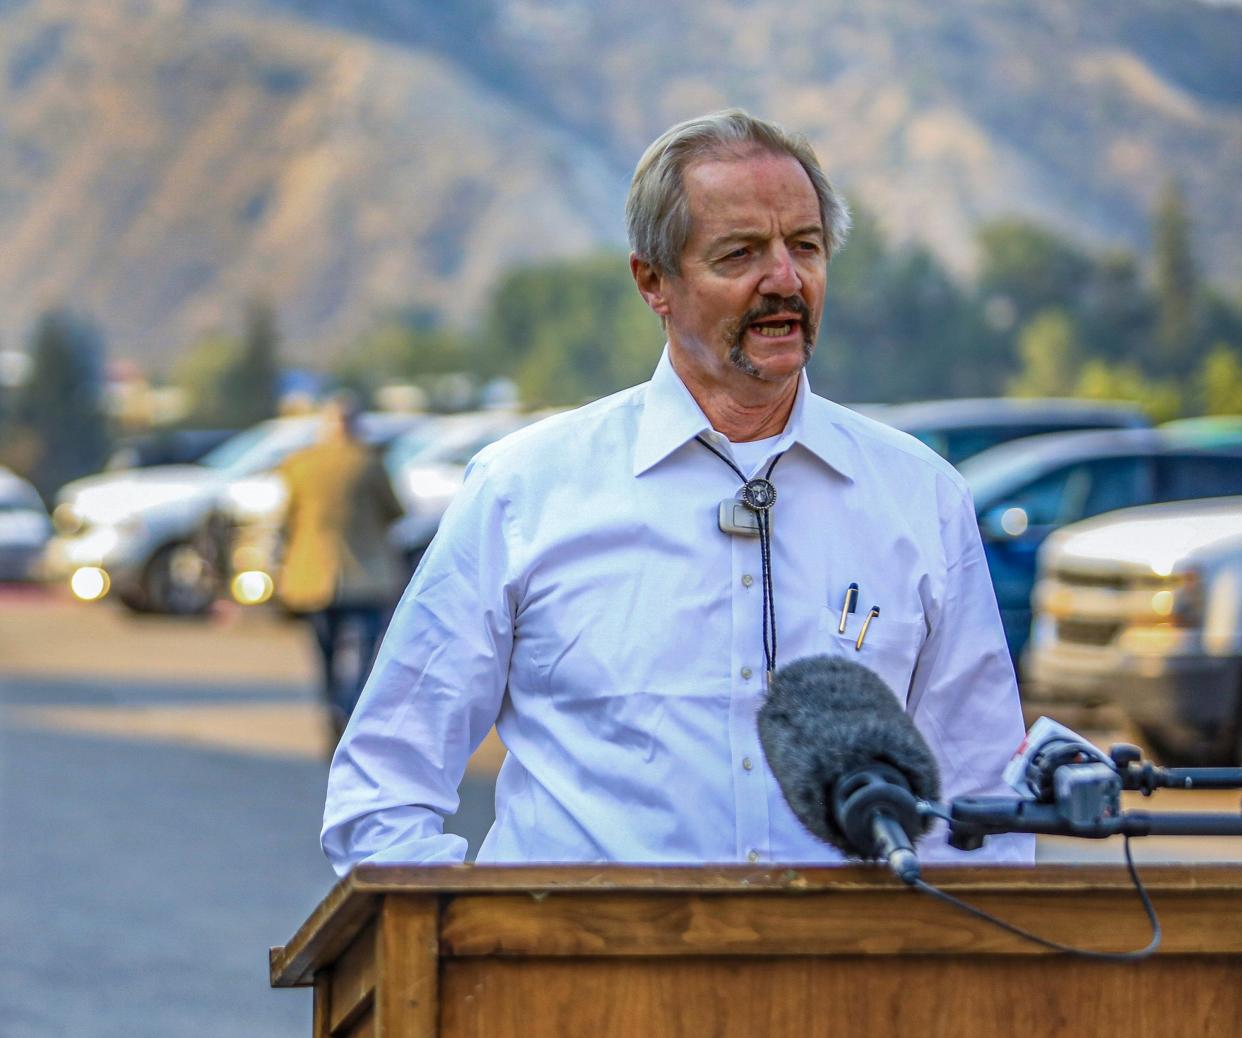 William Perry Pendley, acting director of the Bureau of Land Management, speaks to the media on the Grizzly Creek Fire in Eagle, Colorado on 14 August 2020. (AP)